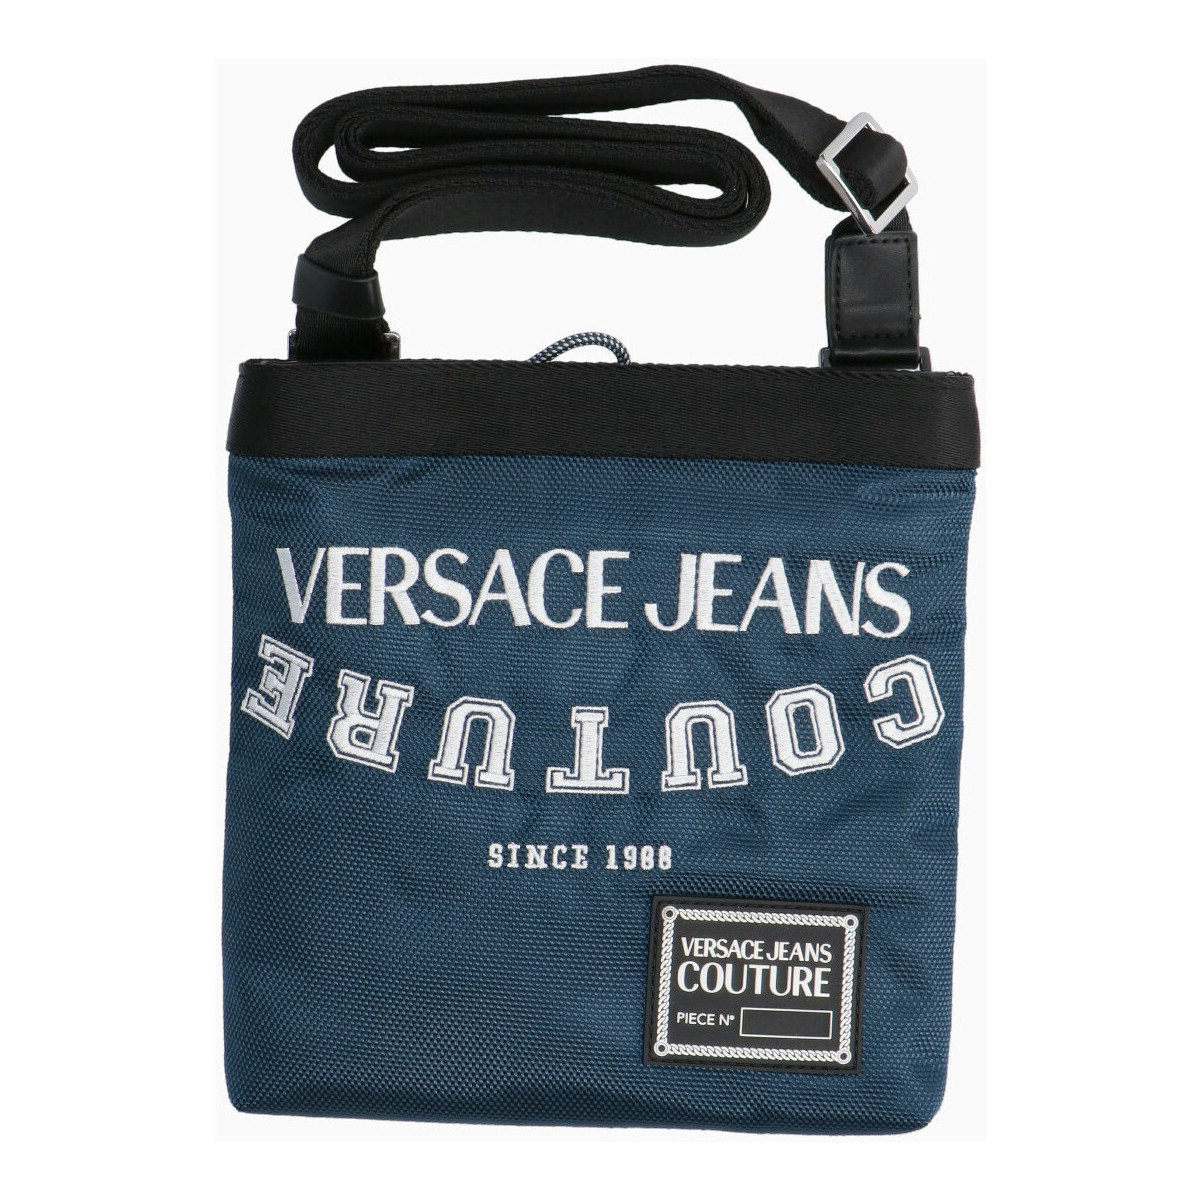 Versace Jeans Couture Tracolla Uomo baw8zQcU